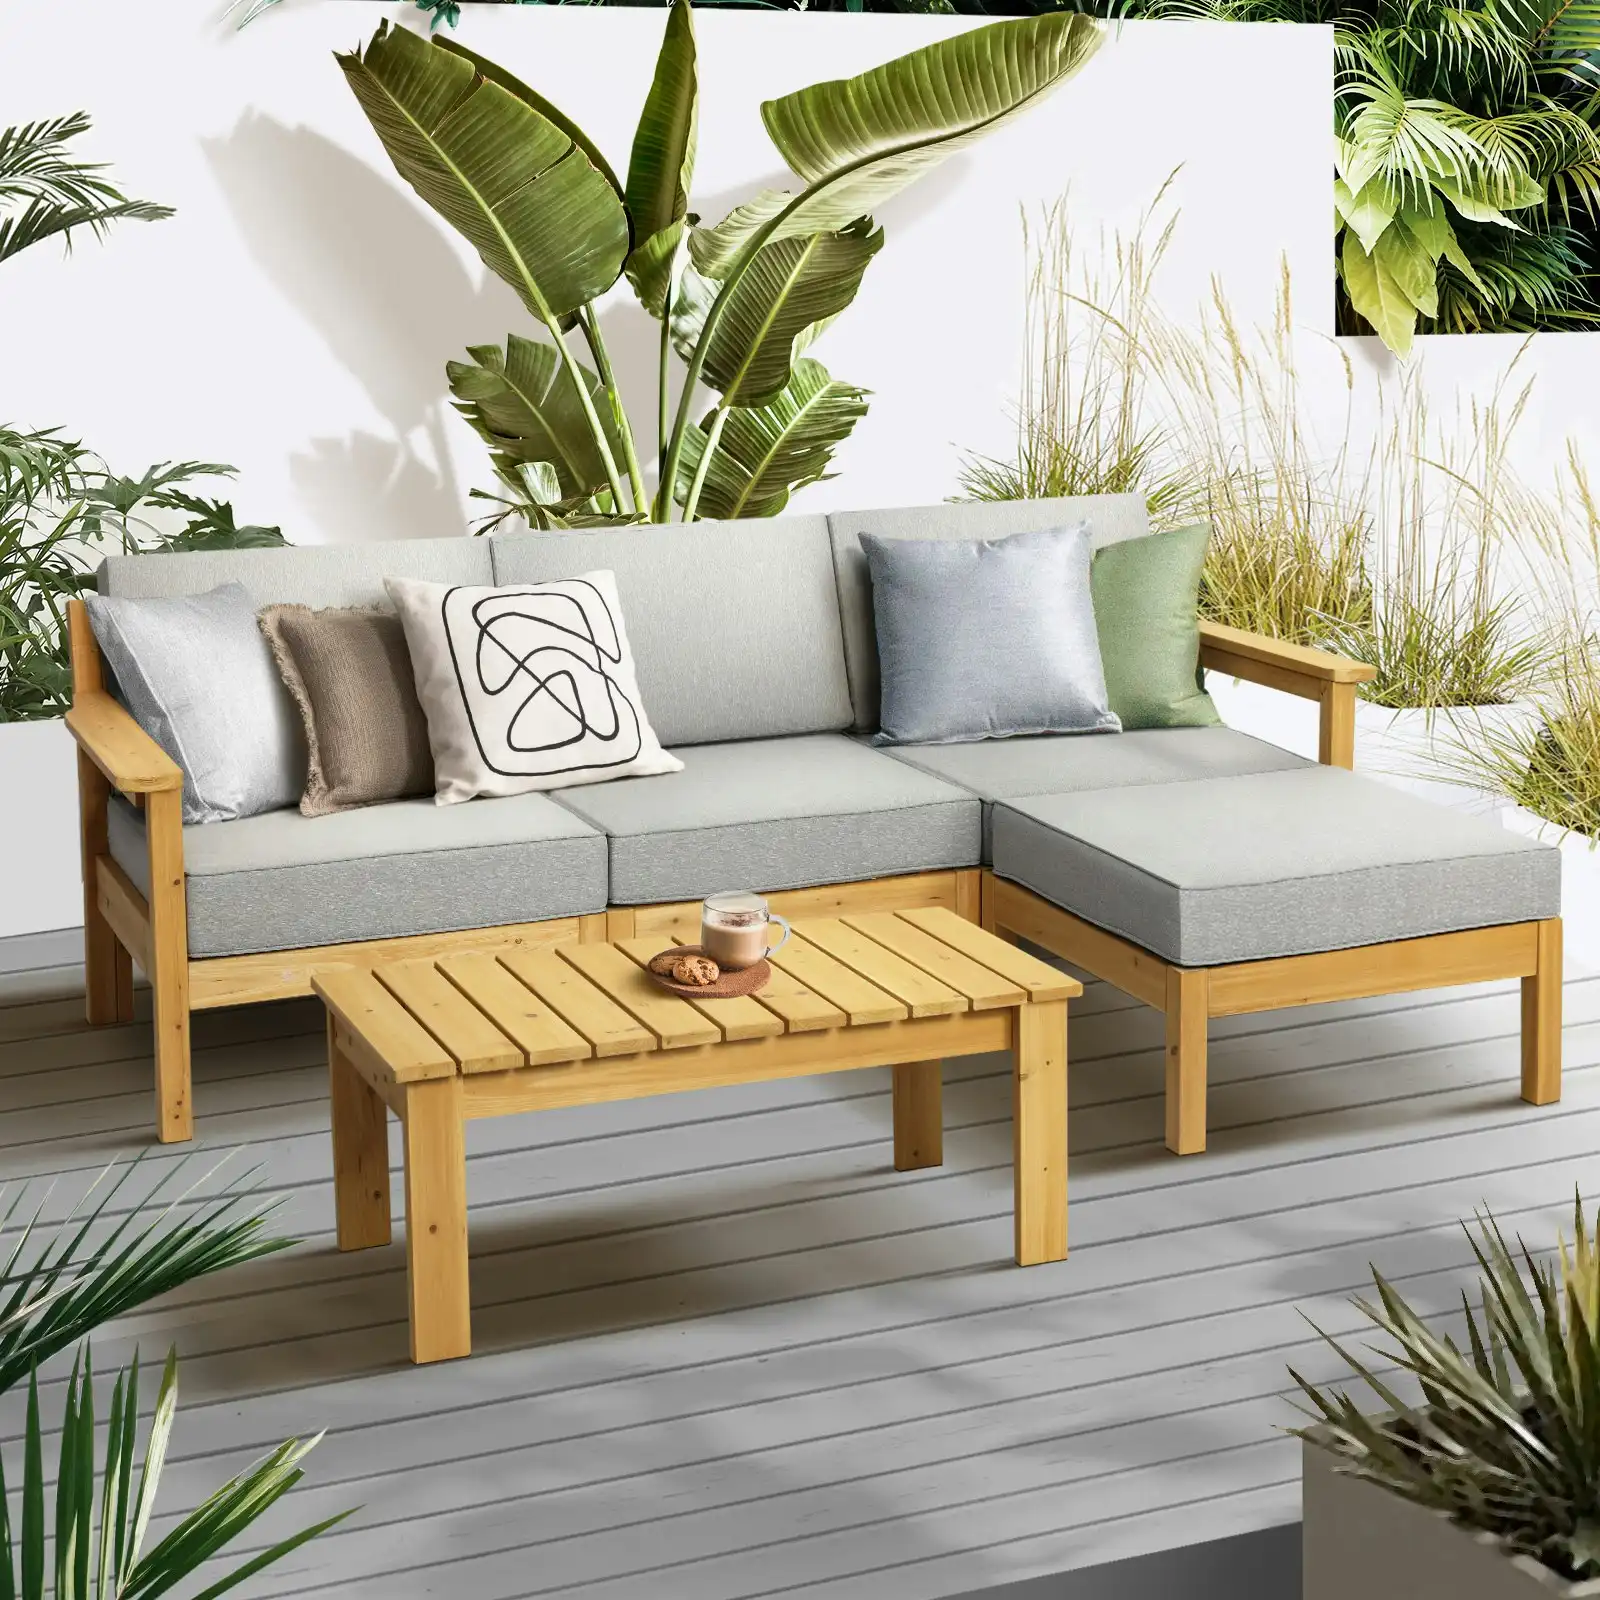 Livsip Outdoor Sofa Set Patio Furniture Wooden Table Chairs Garden Lounge 5Piece